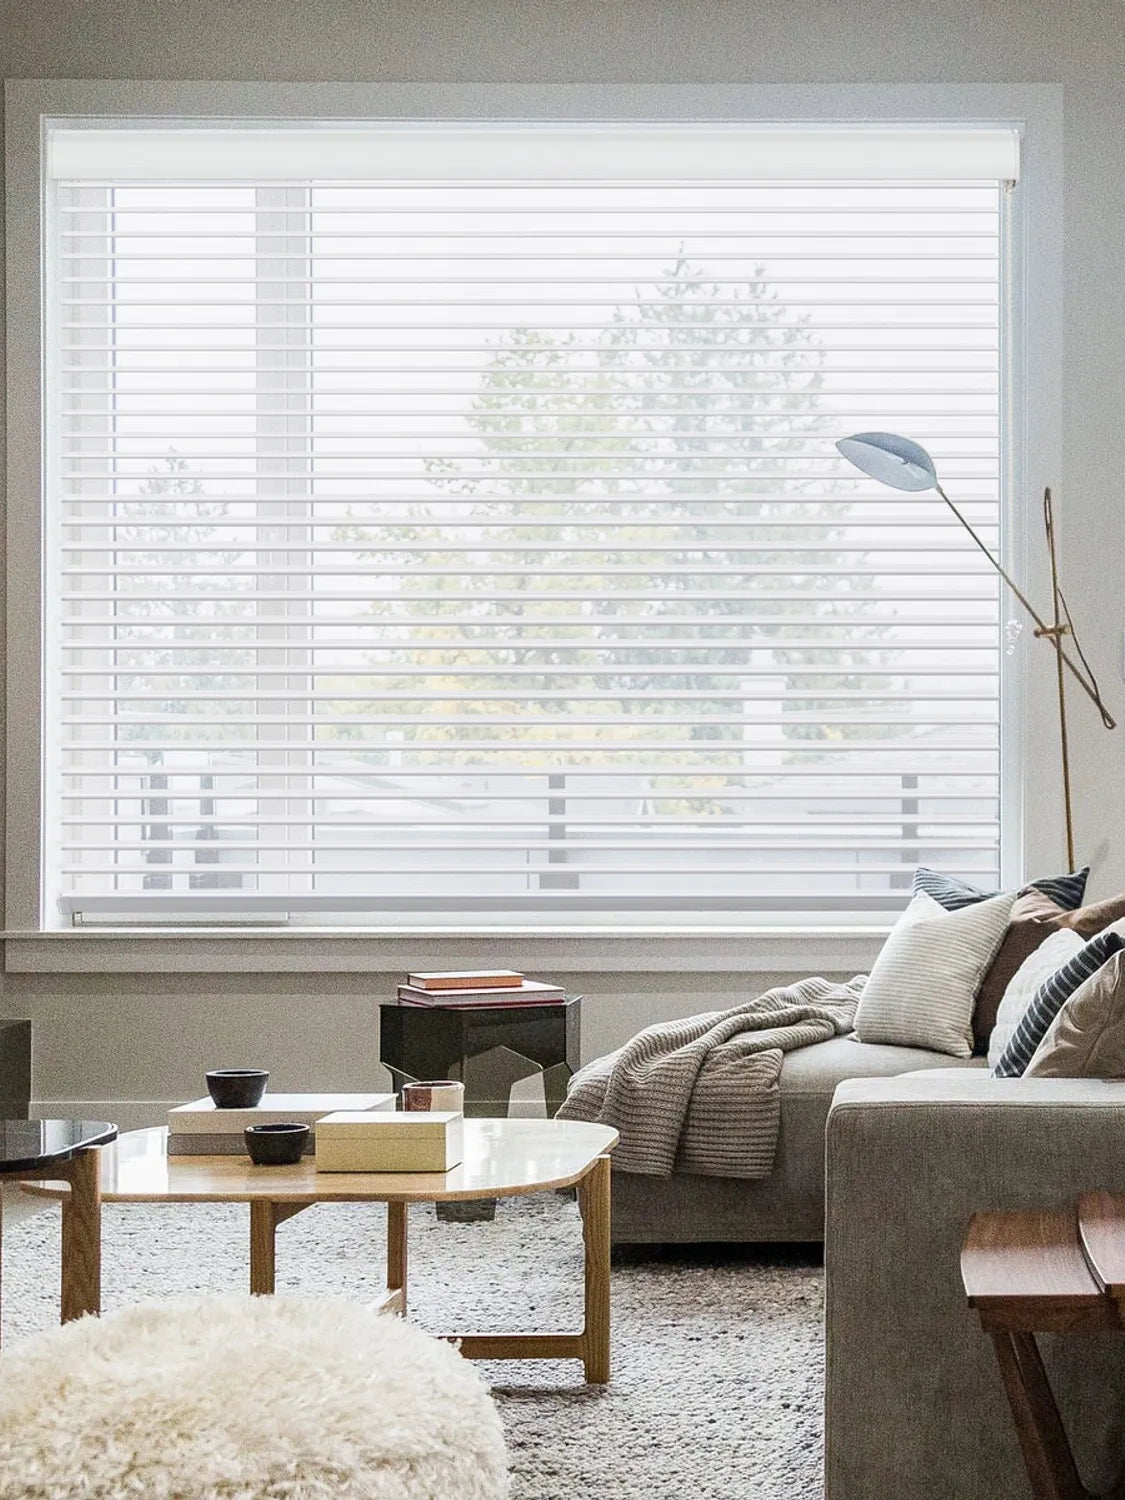 Stylish living room with white horizontal blinds filtering natural light, featuring a cozy sofa and modern decor